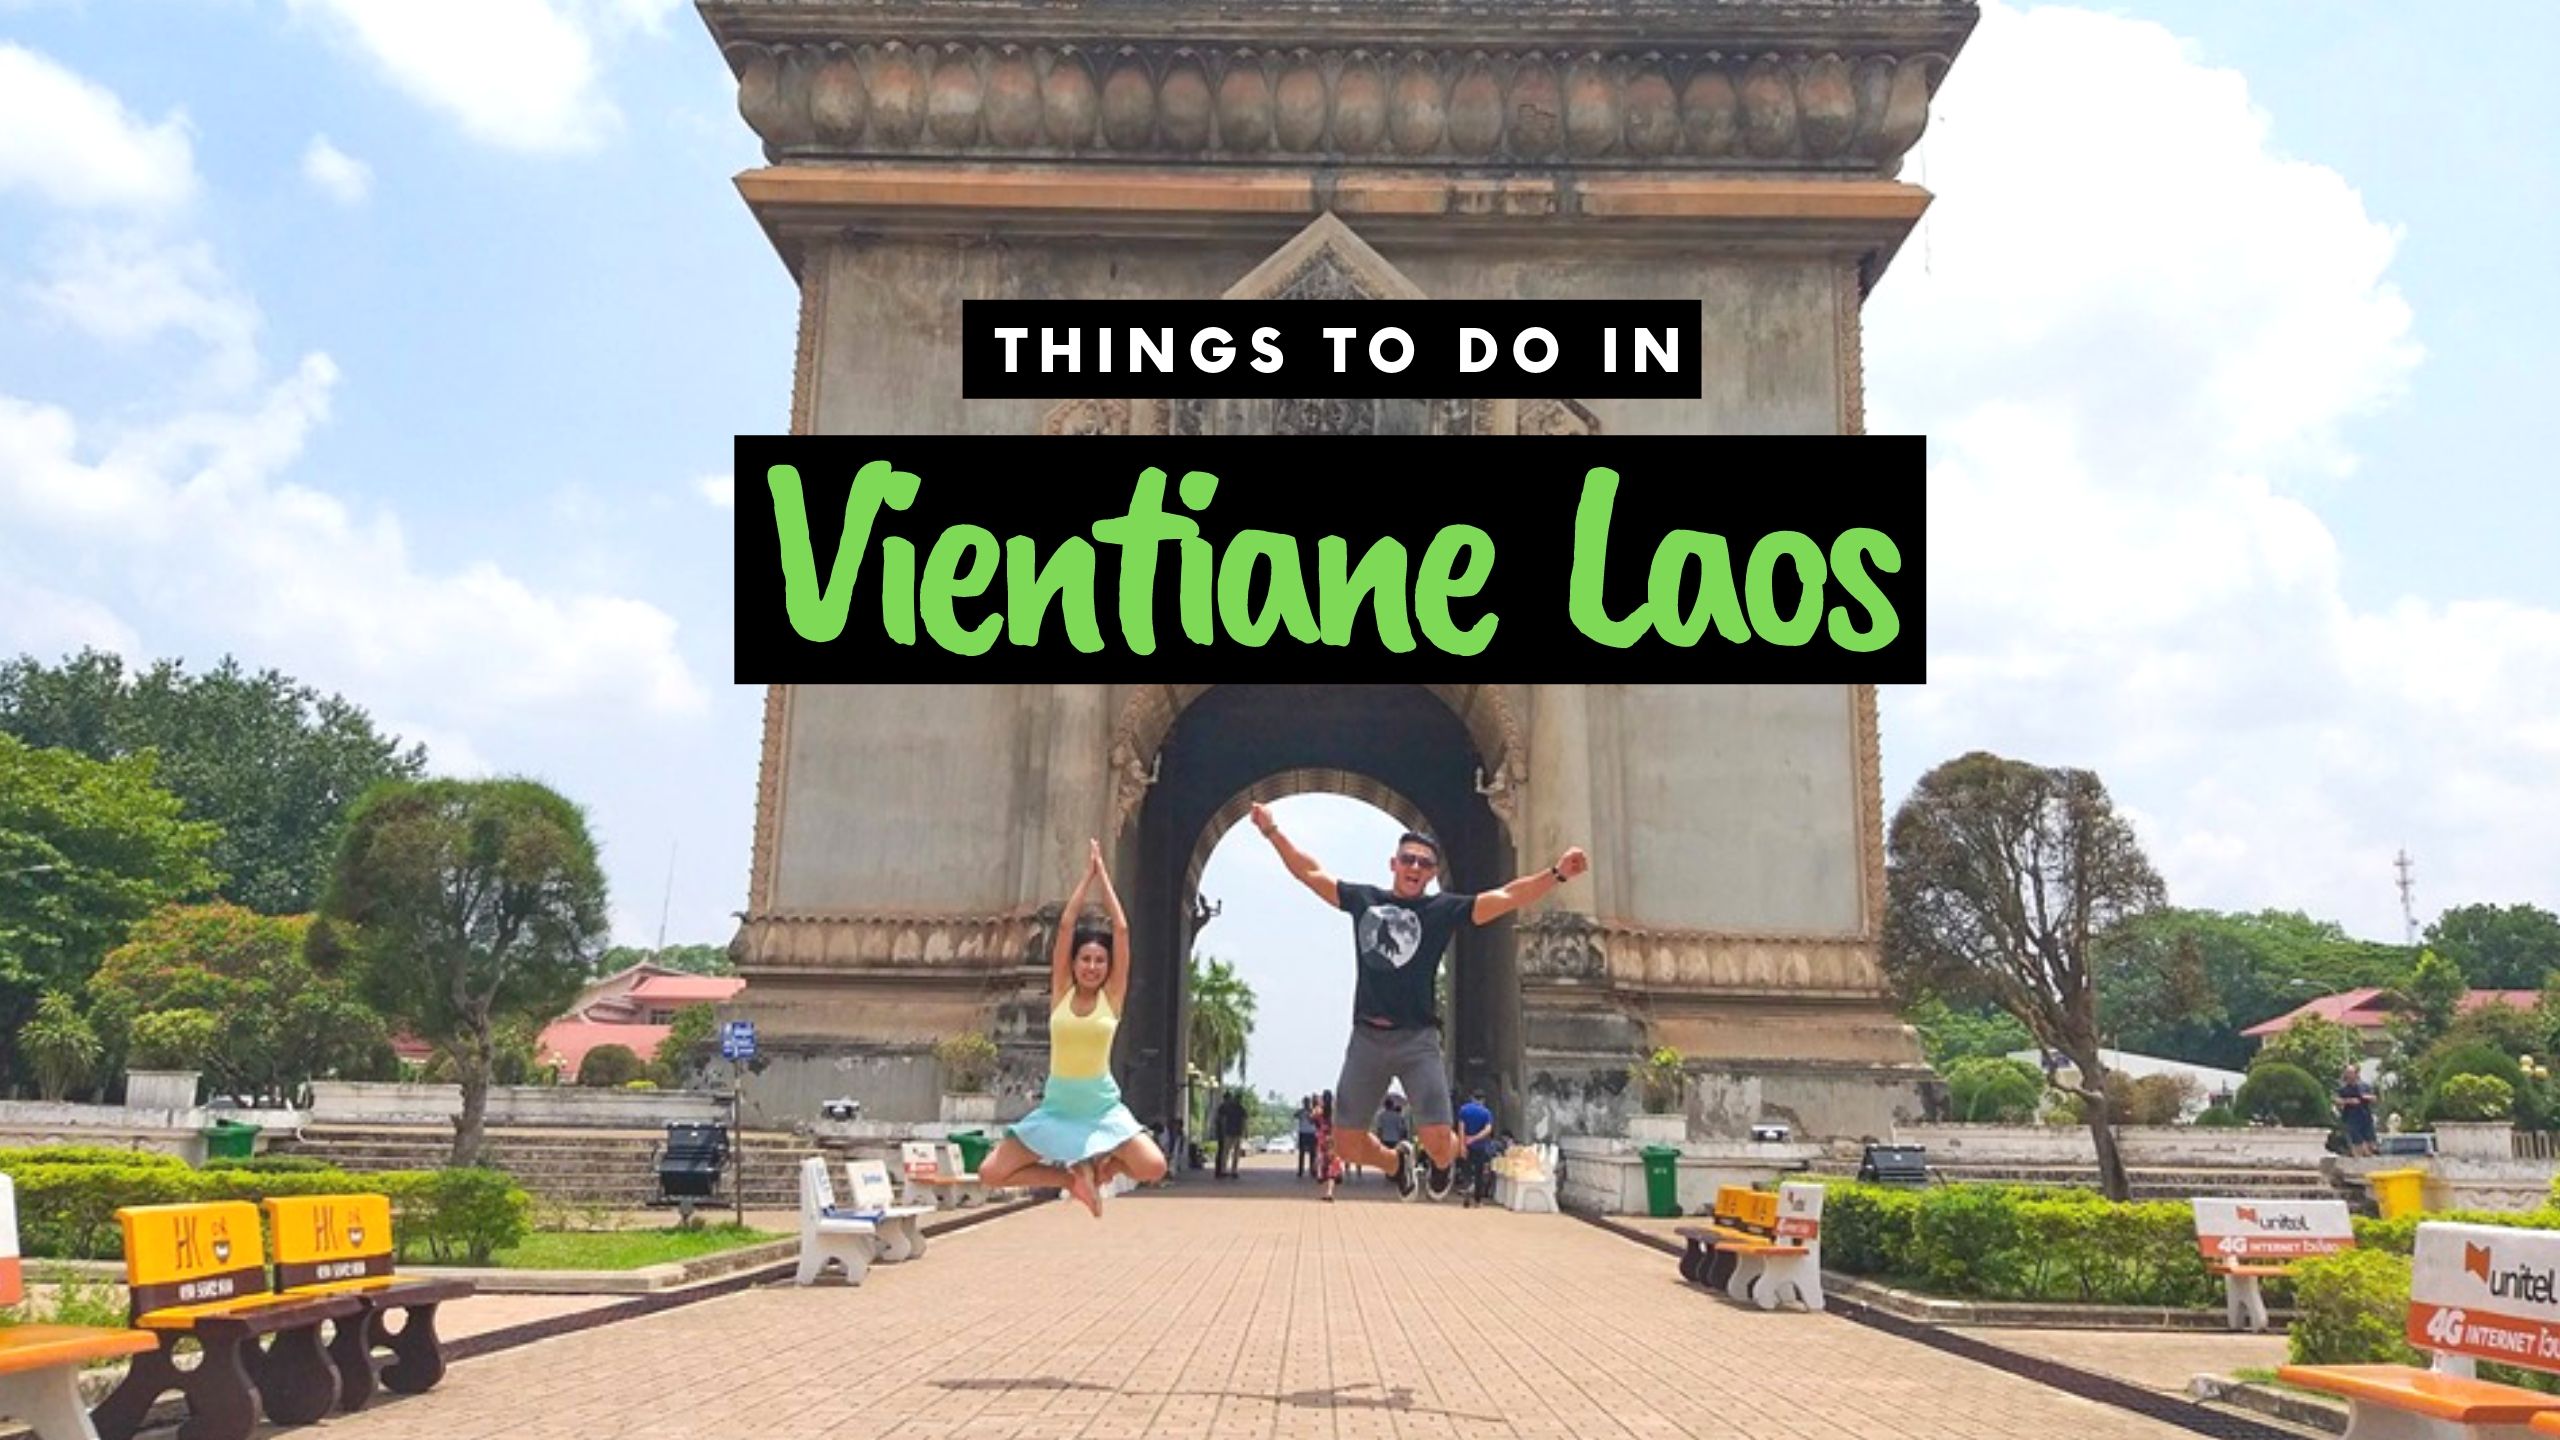 Things to do in Vientiane Laos